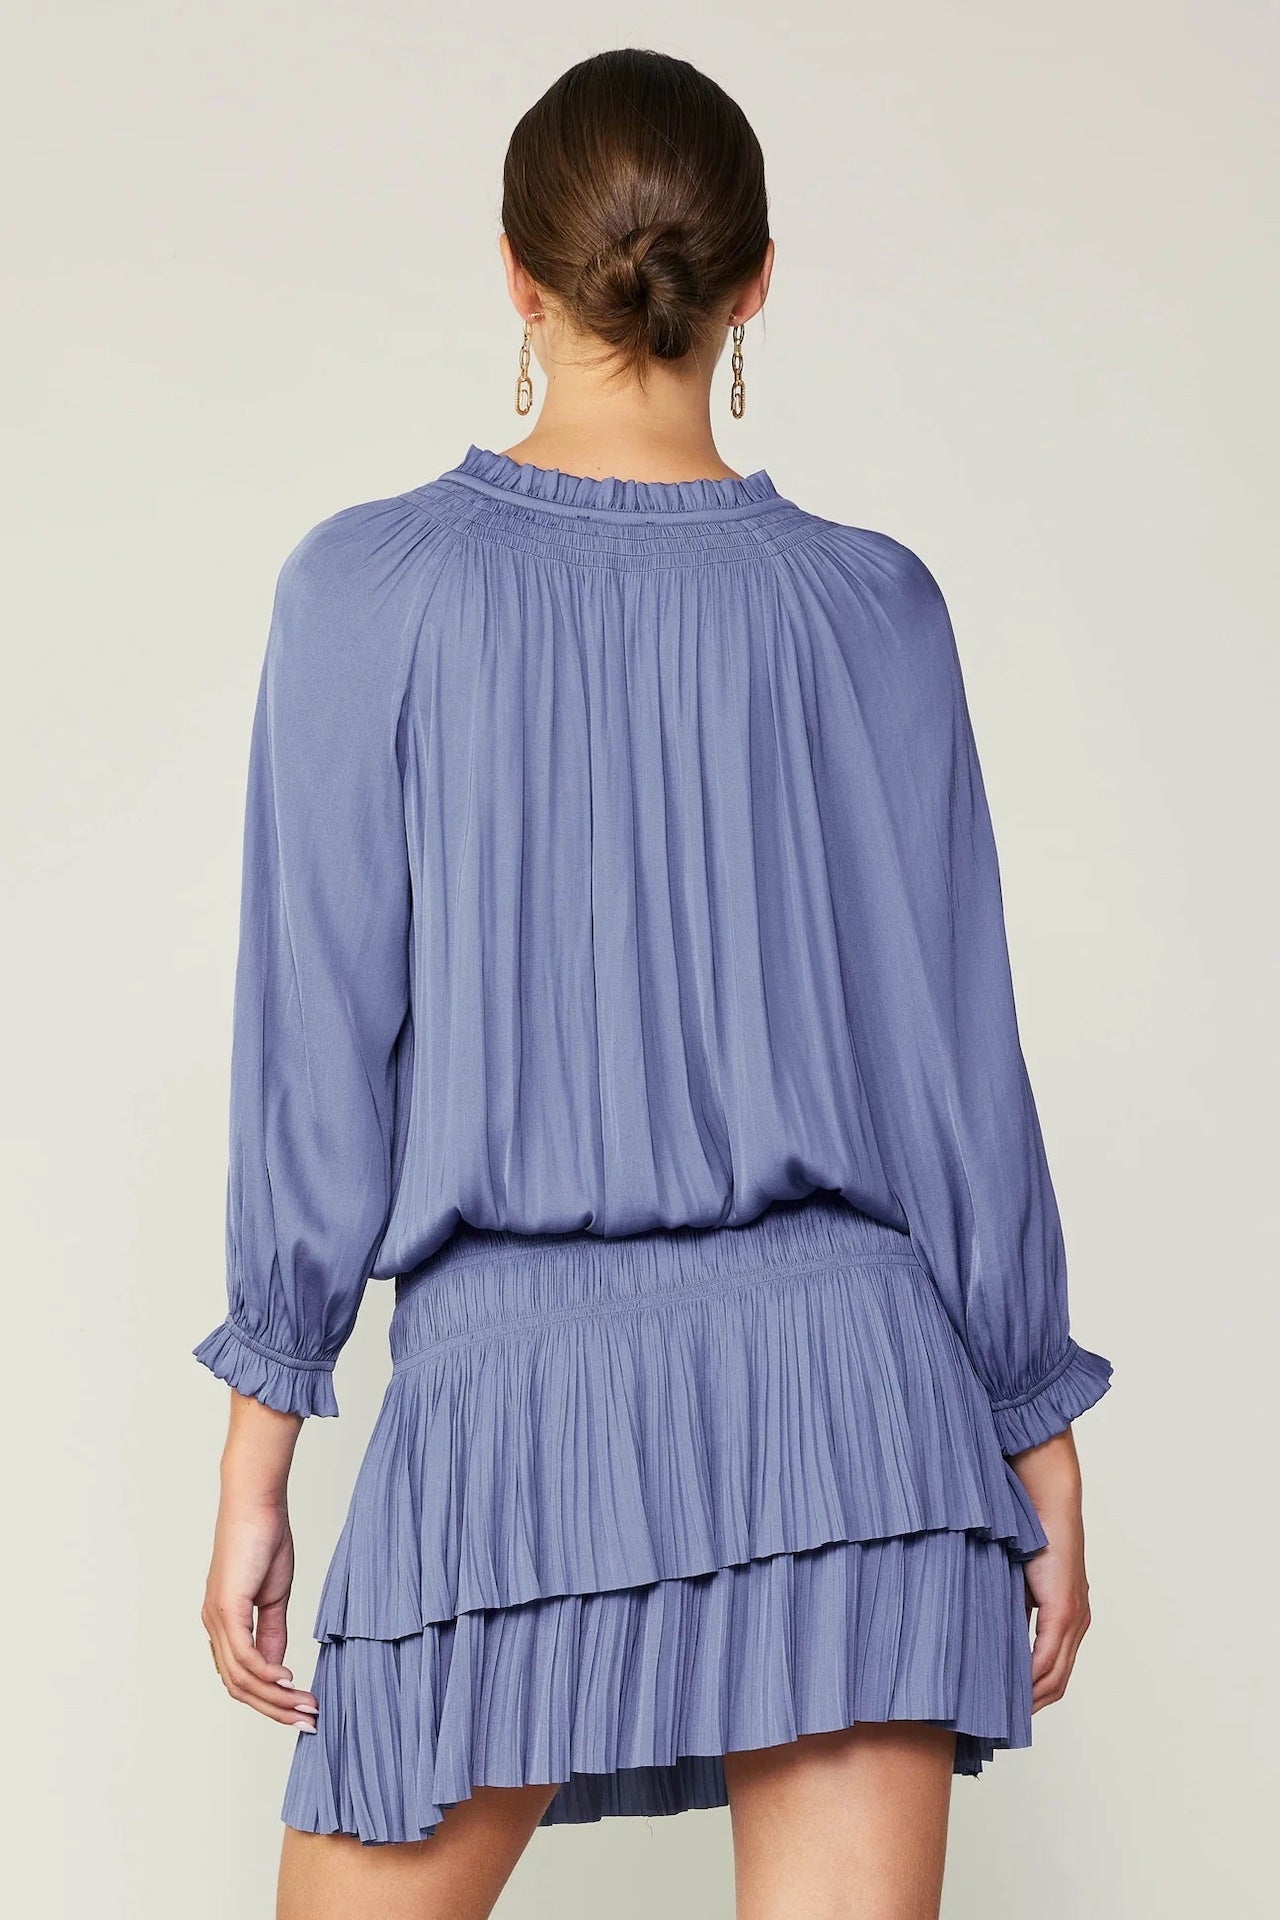 current air dress pleated mini dress with long sleeves